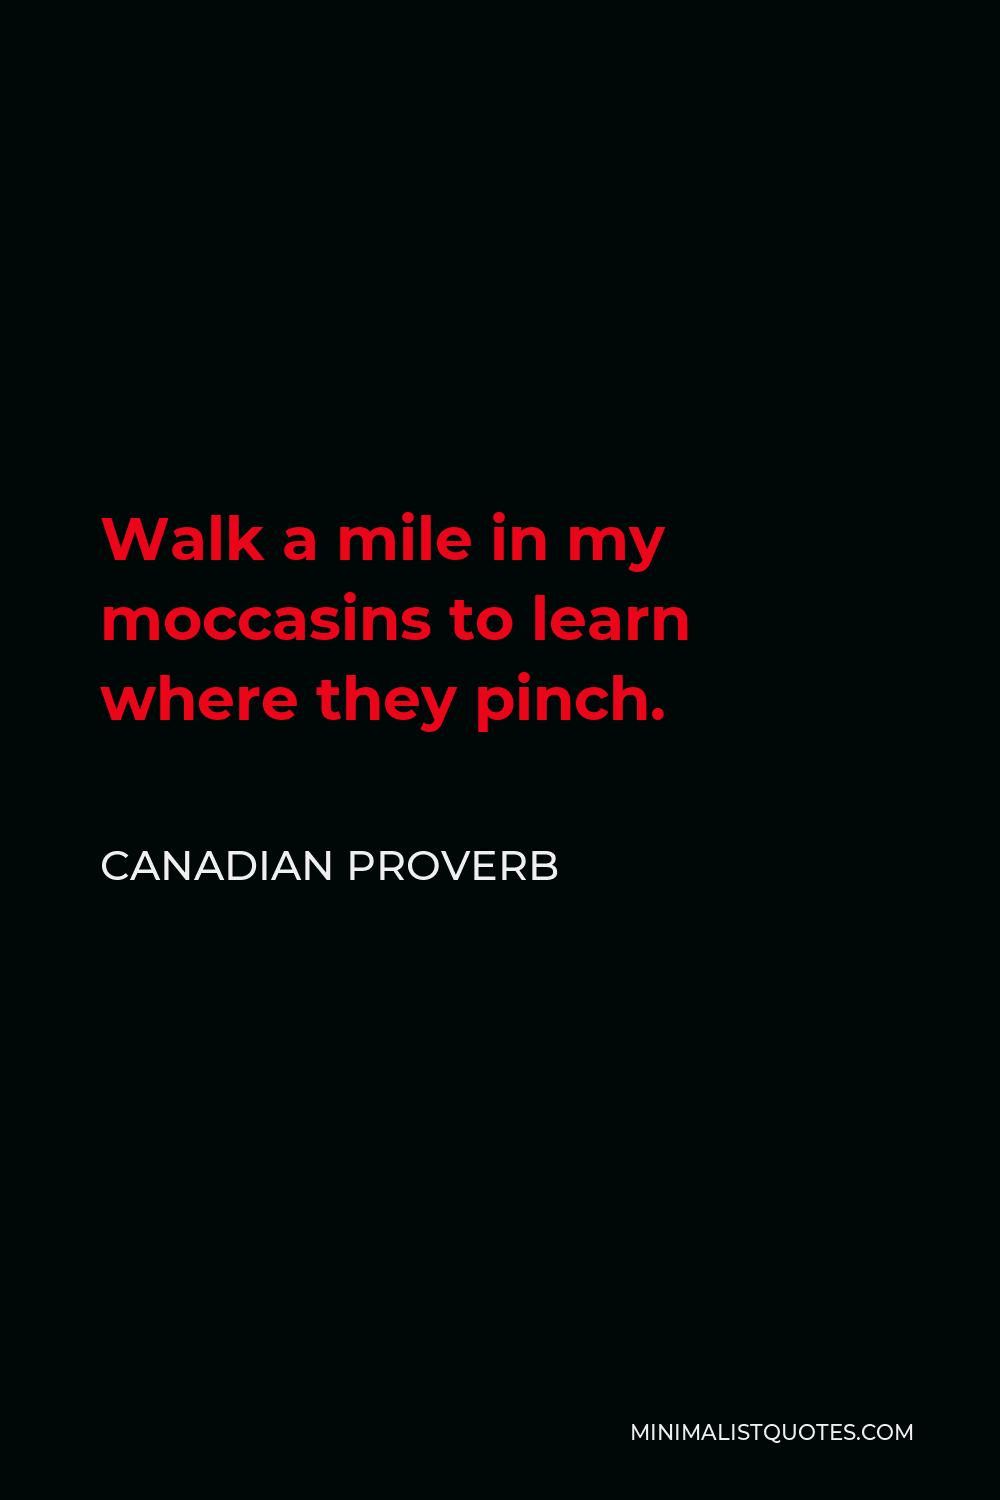 Canadian Proverb Quote - Walk a mile in my moccasins to learn where they pinch.